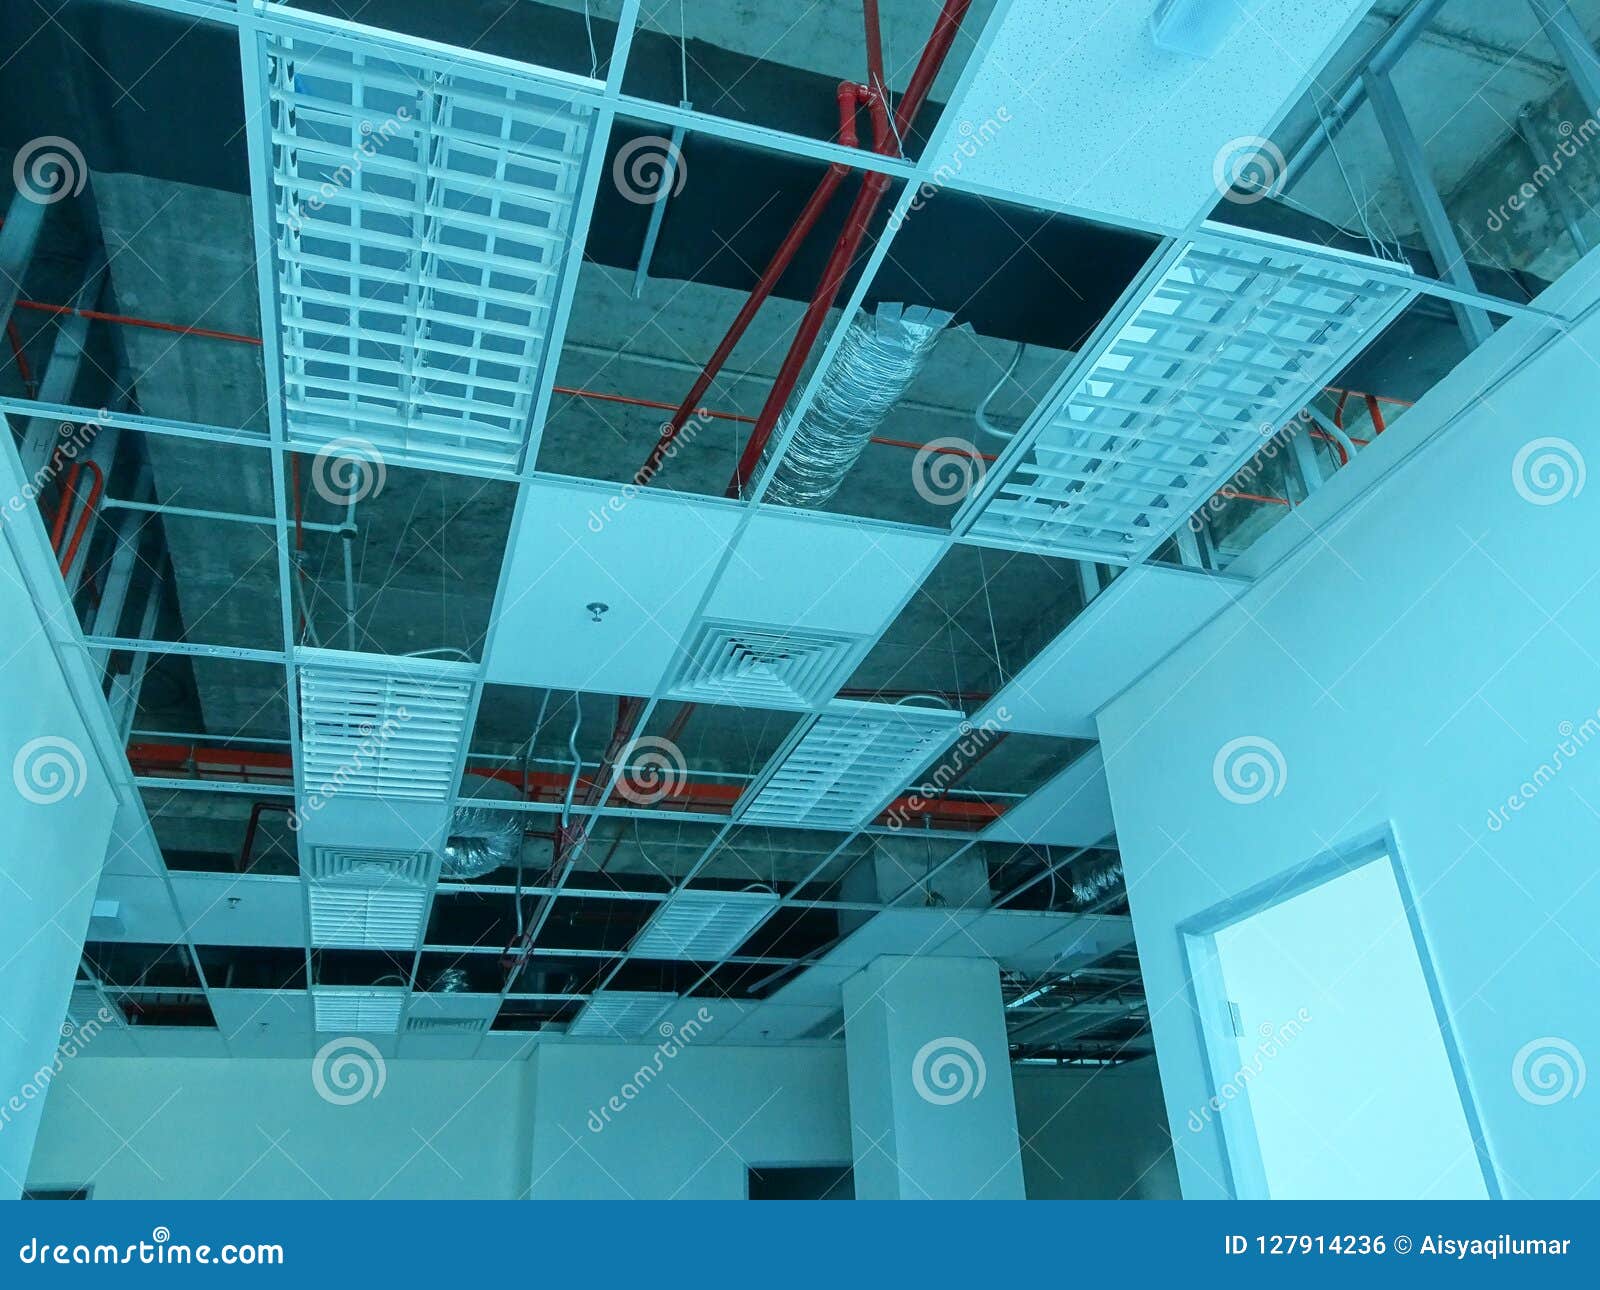 Suspended Ceiling Frame And Board Under Construction Editorial